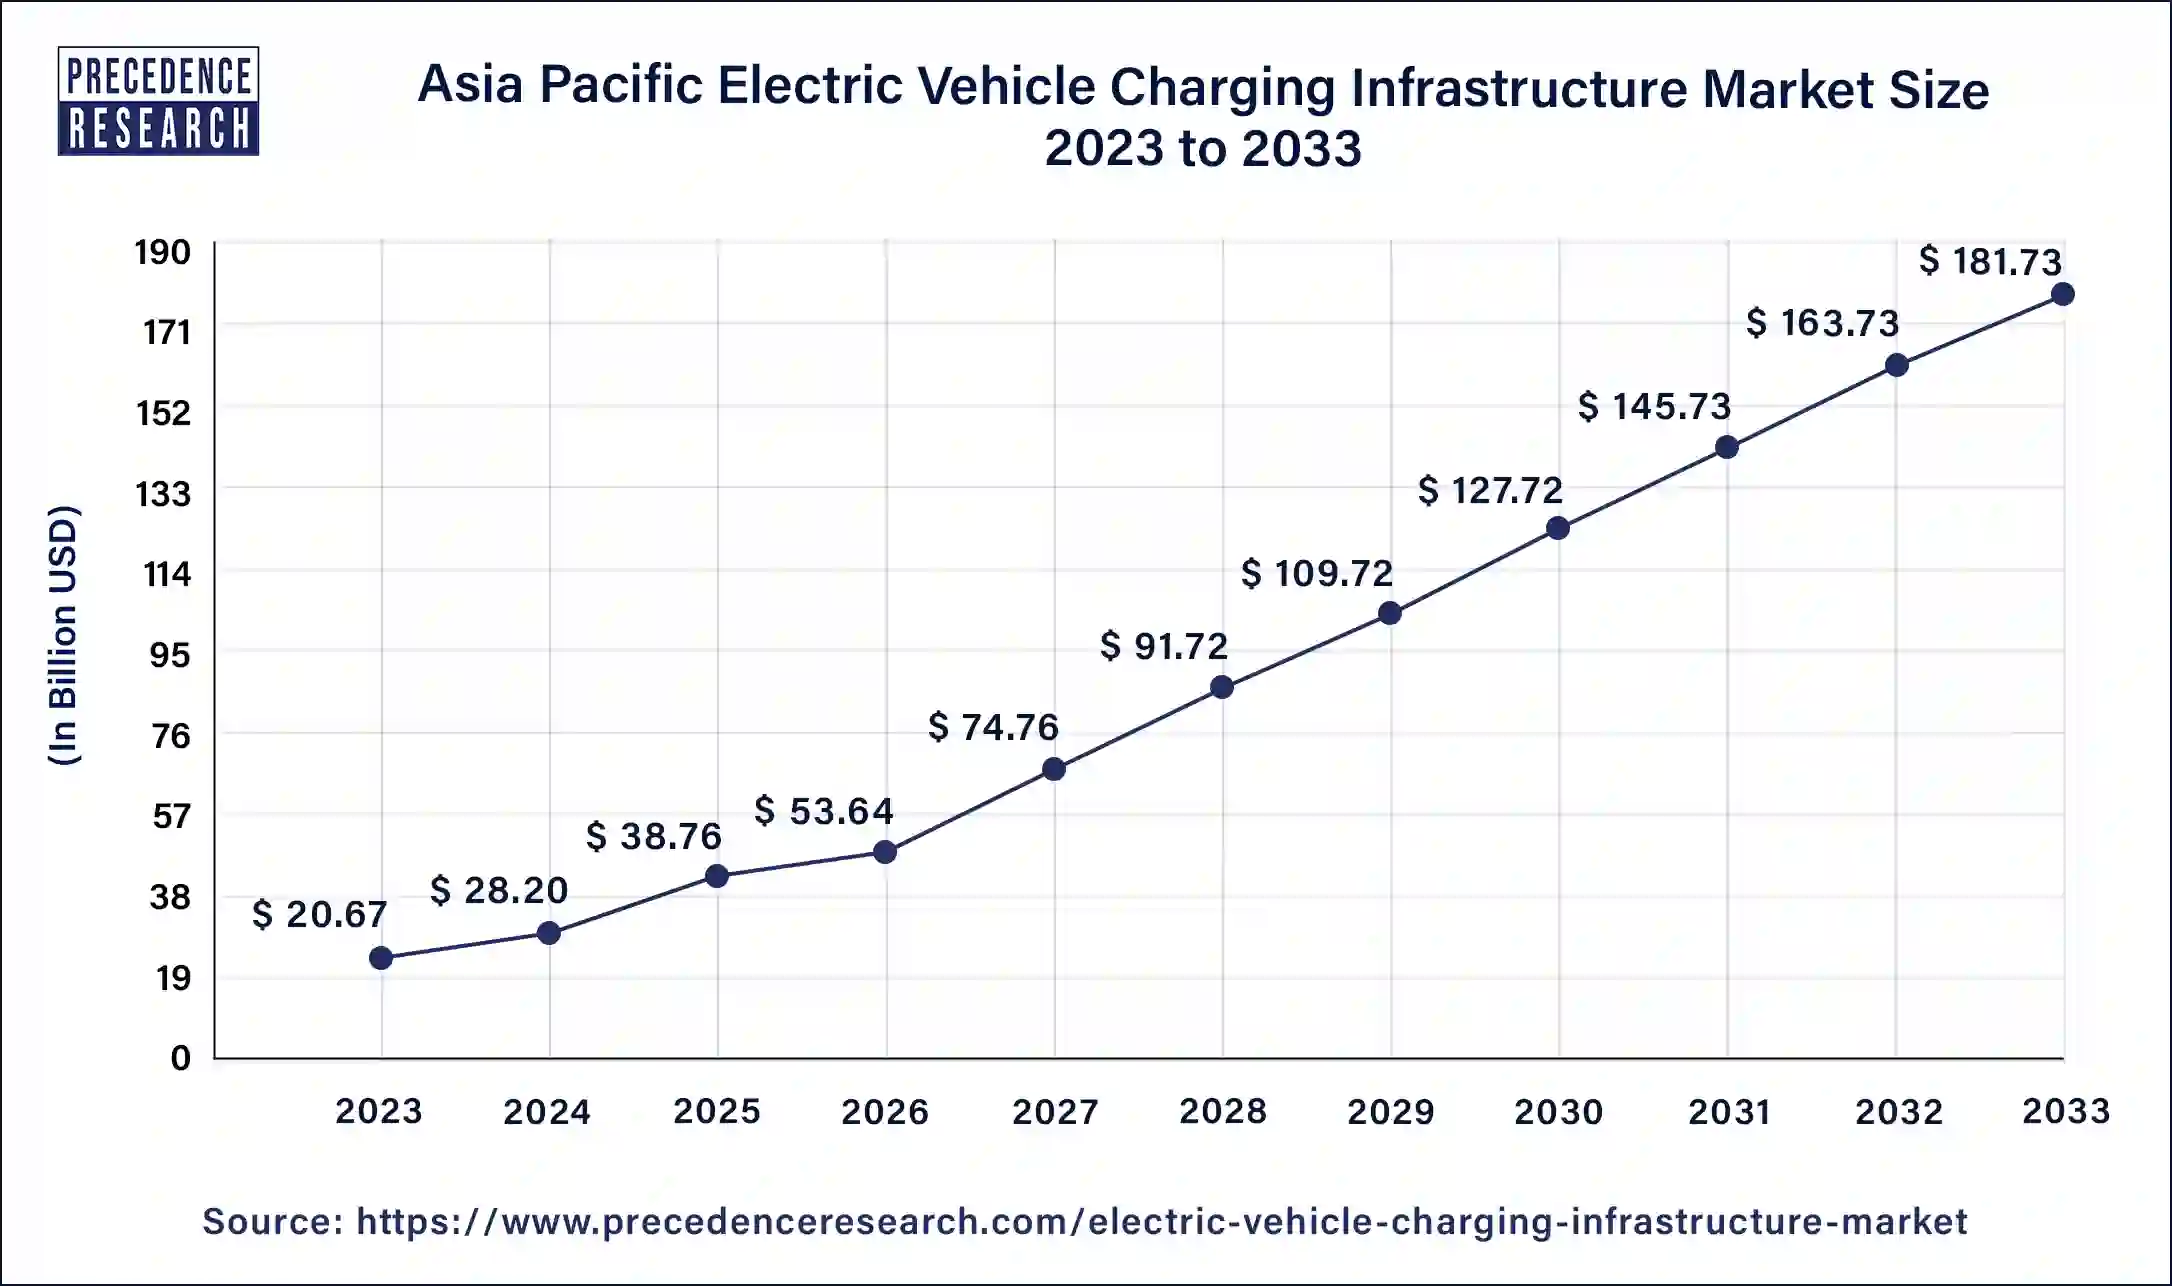 Asia Pacific Electric Vehicle Charging Infrastructure Market Size 2024 to 2033